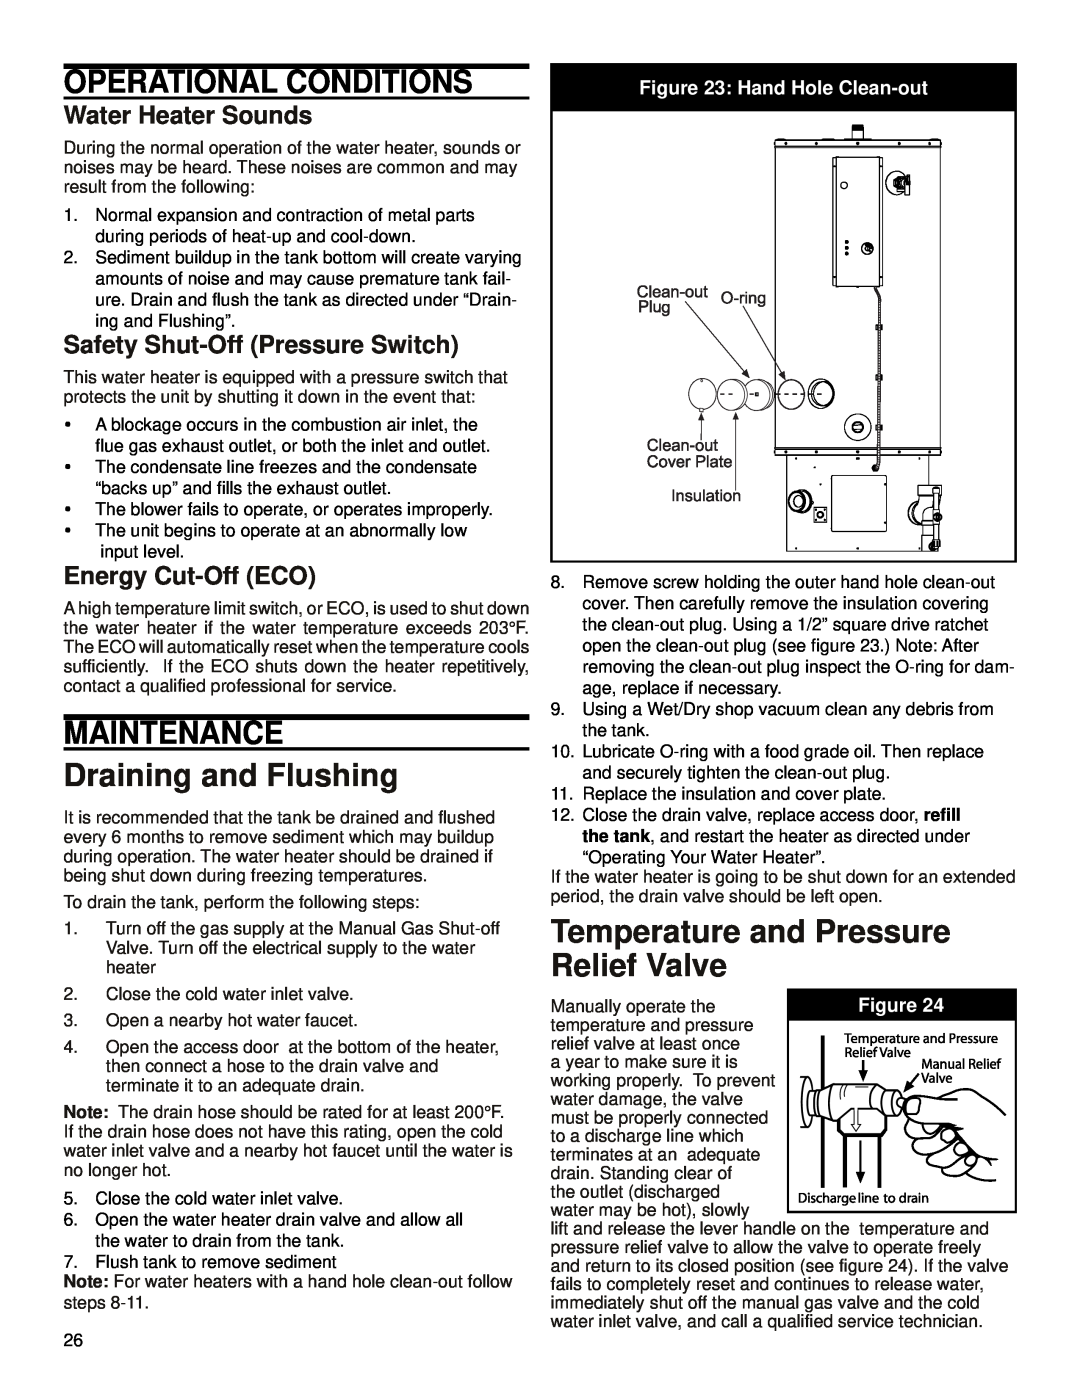 Polaris PR 199-50 3NV OR 3PV Operational Conditions, Maintenance, Draining and Flushing, Water Heater Sounds 